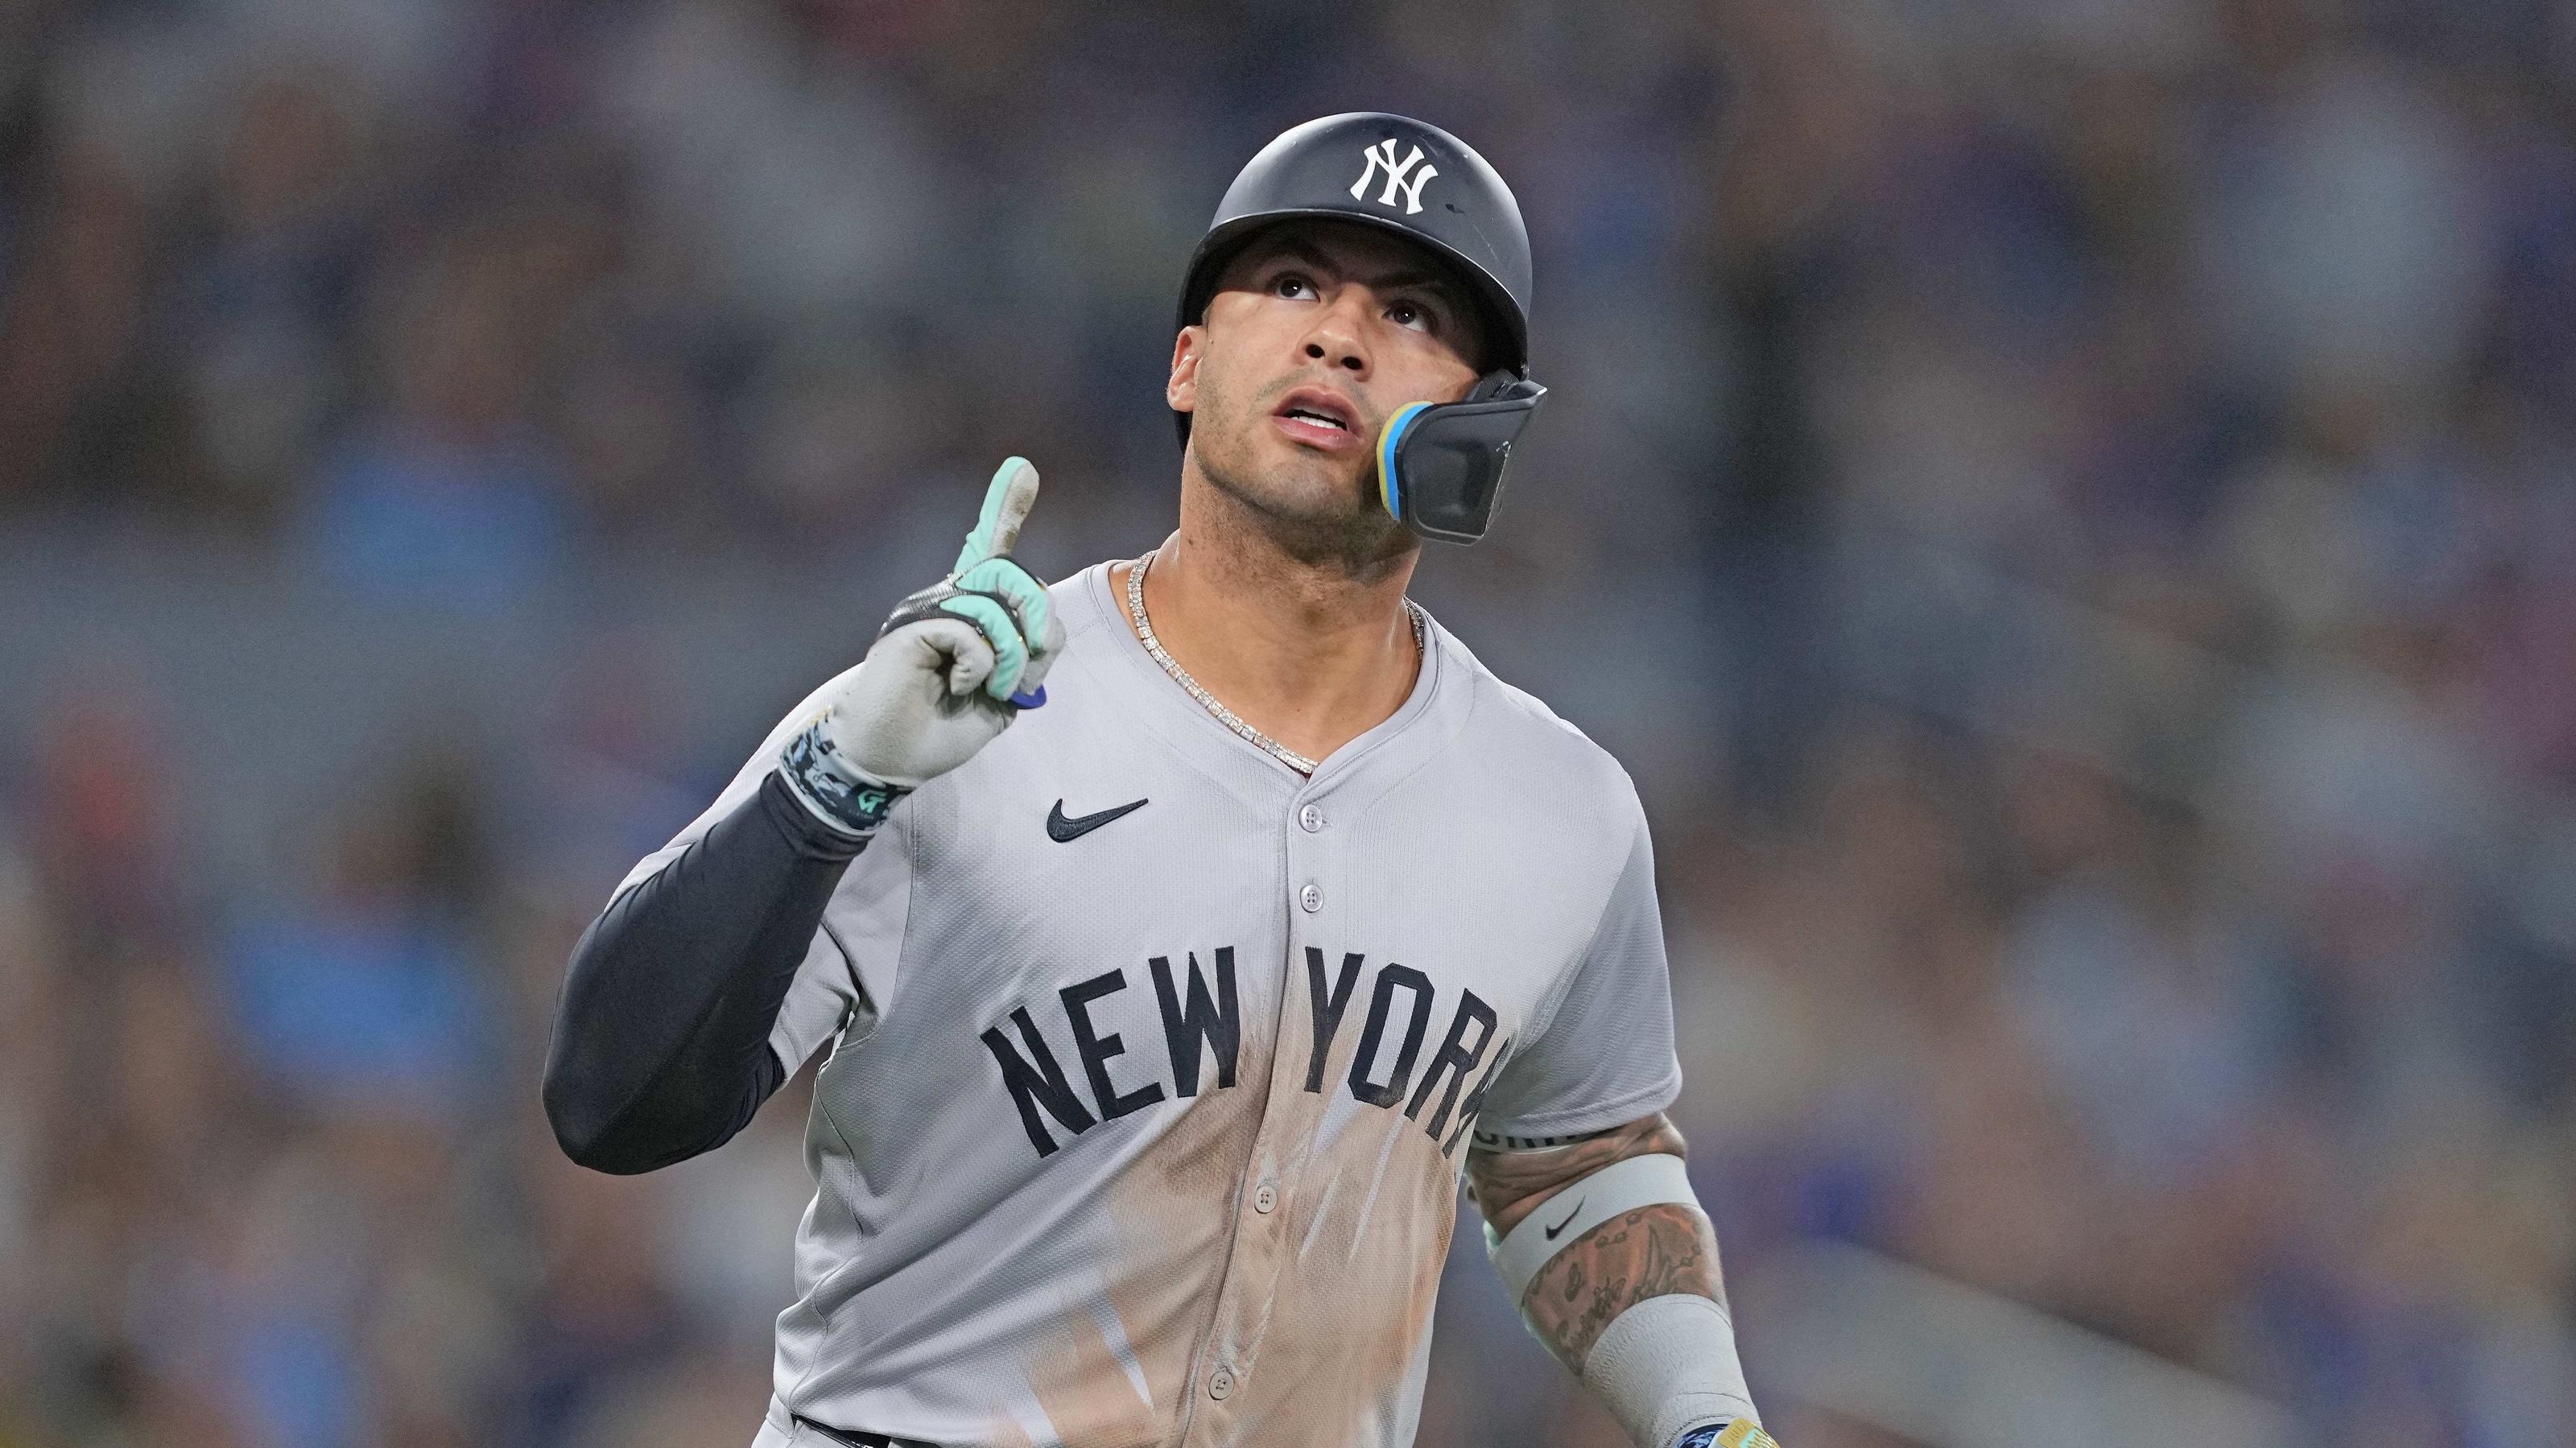 New York Yankees second base Gleyber Torres (25) celebrates after hitting a home run against the Toronto Blue Jays during the sixth inning at Rogers Centre. / Nick Turchiaro-USA TODAY Sports